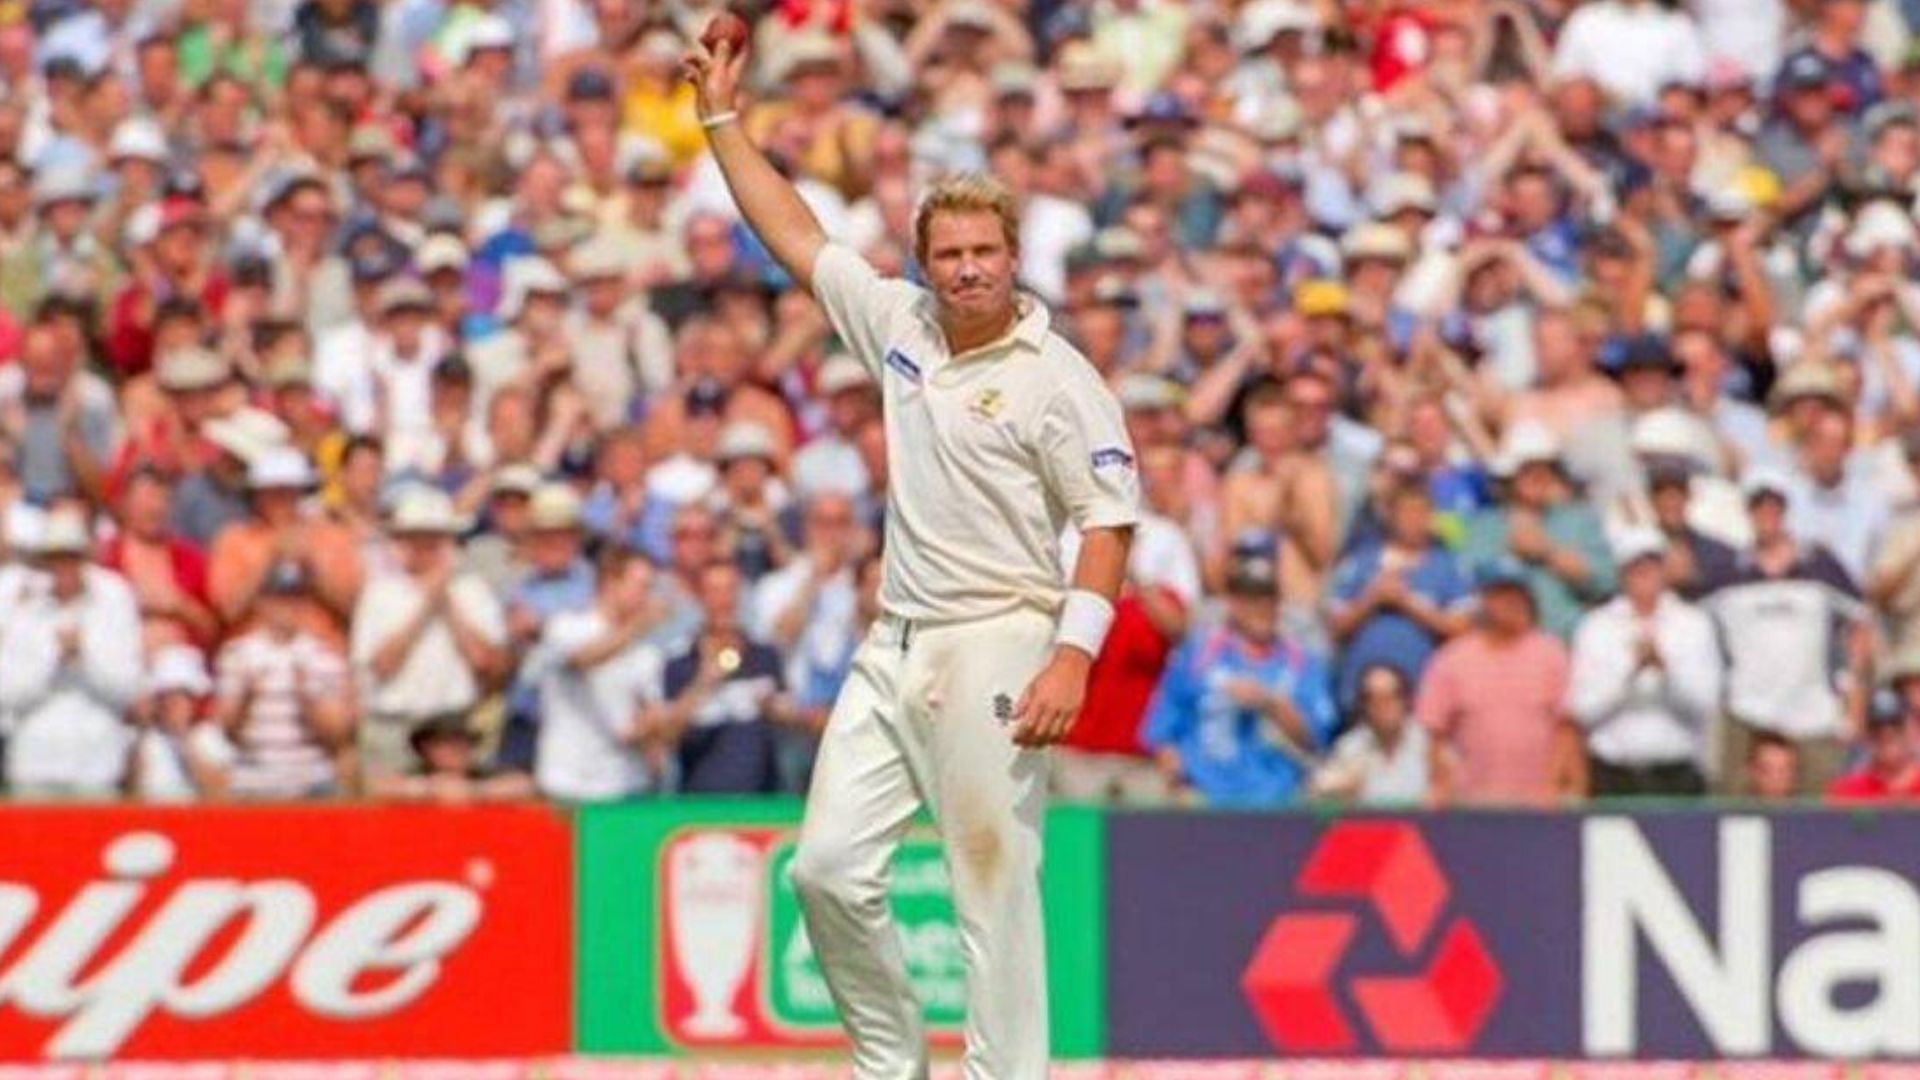 Shane Warne is the leading wicket taker in the Ashes. 